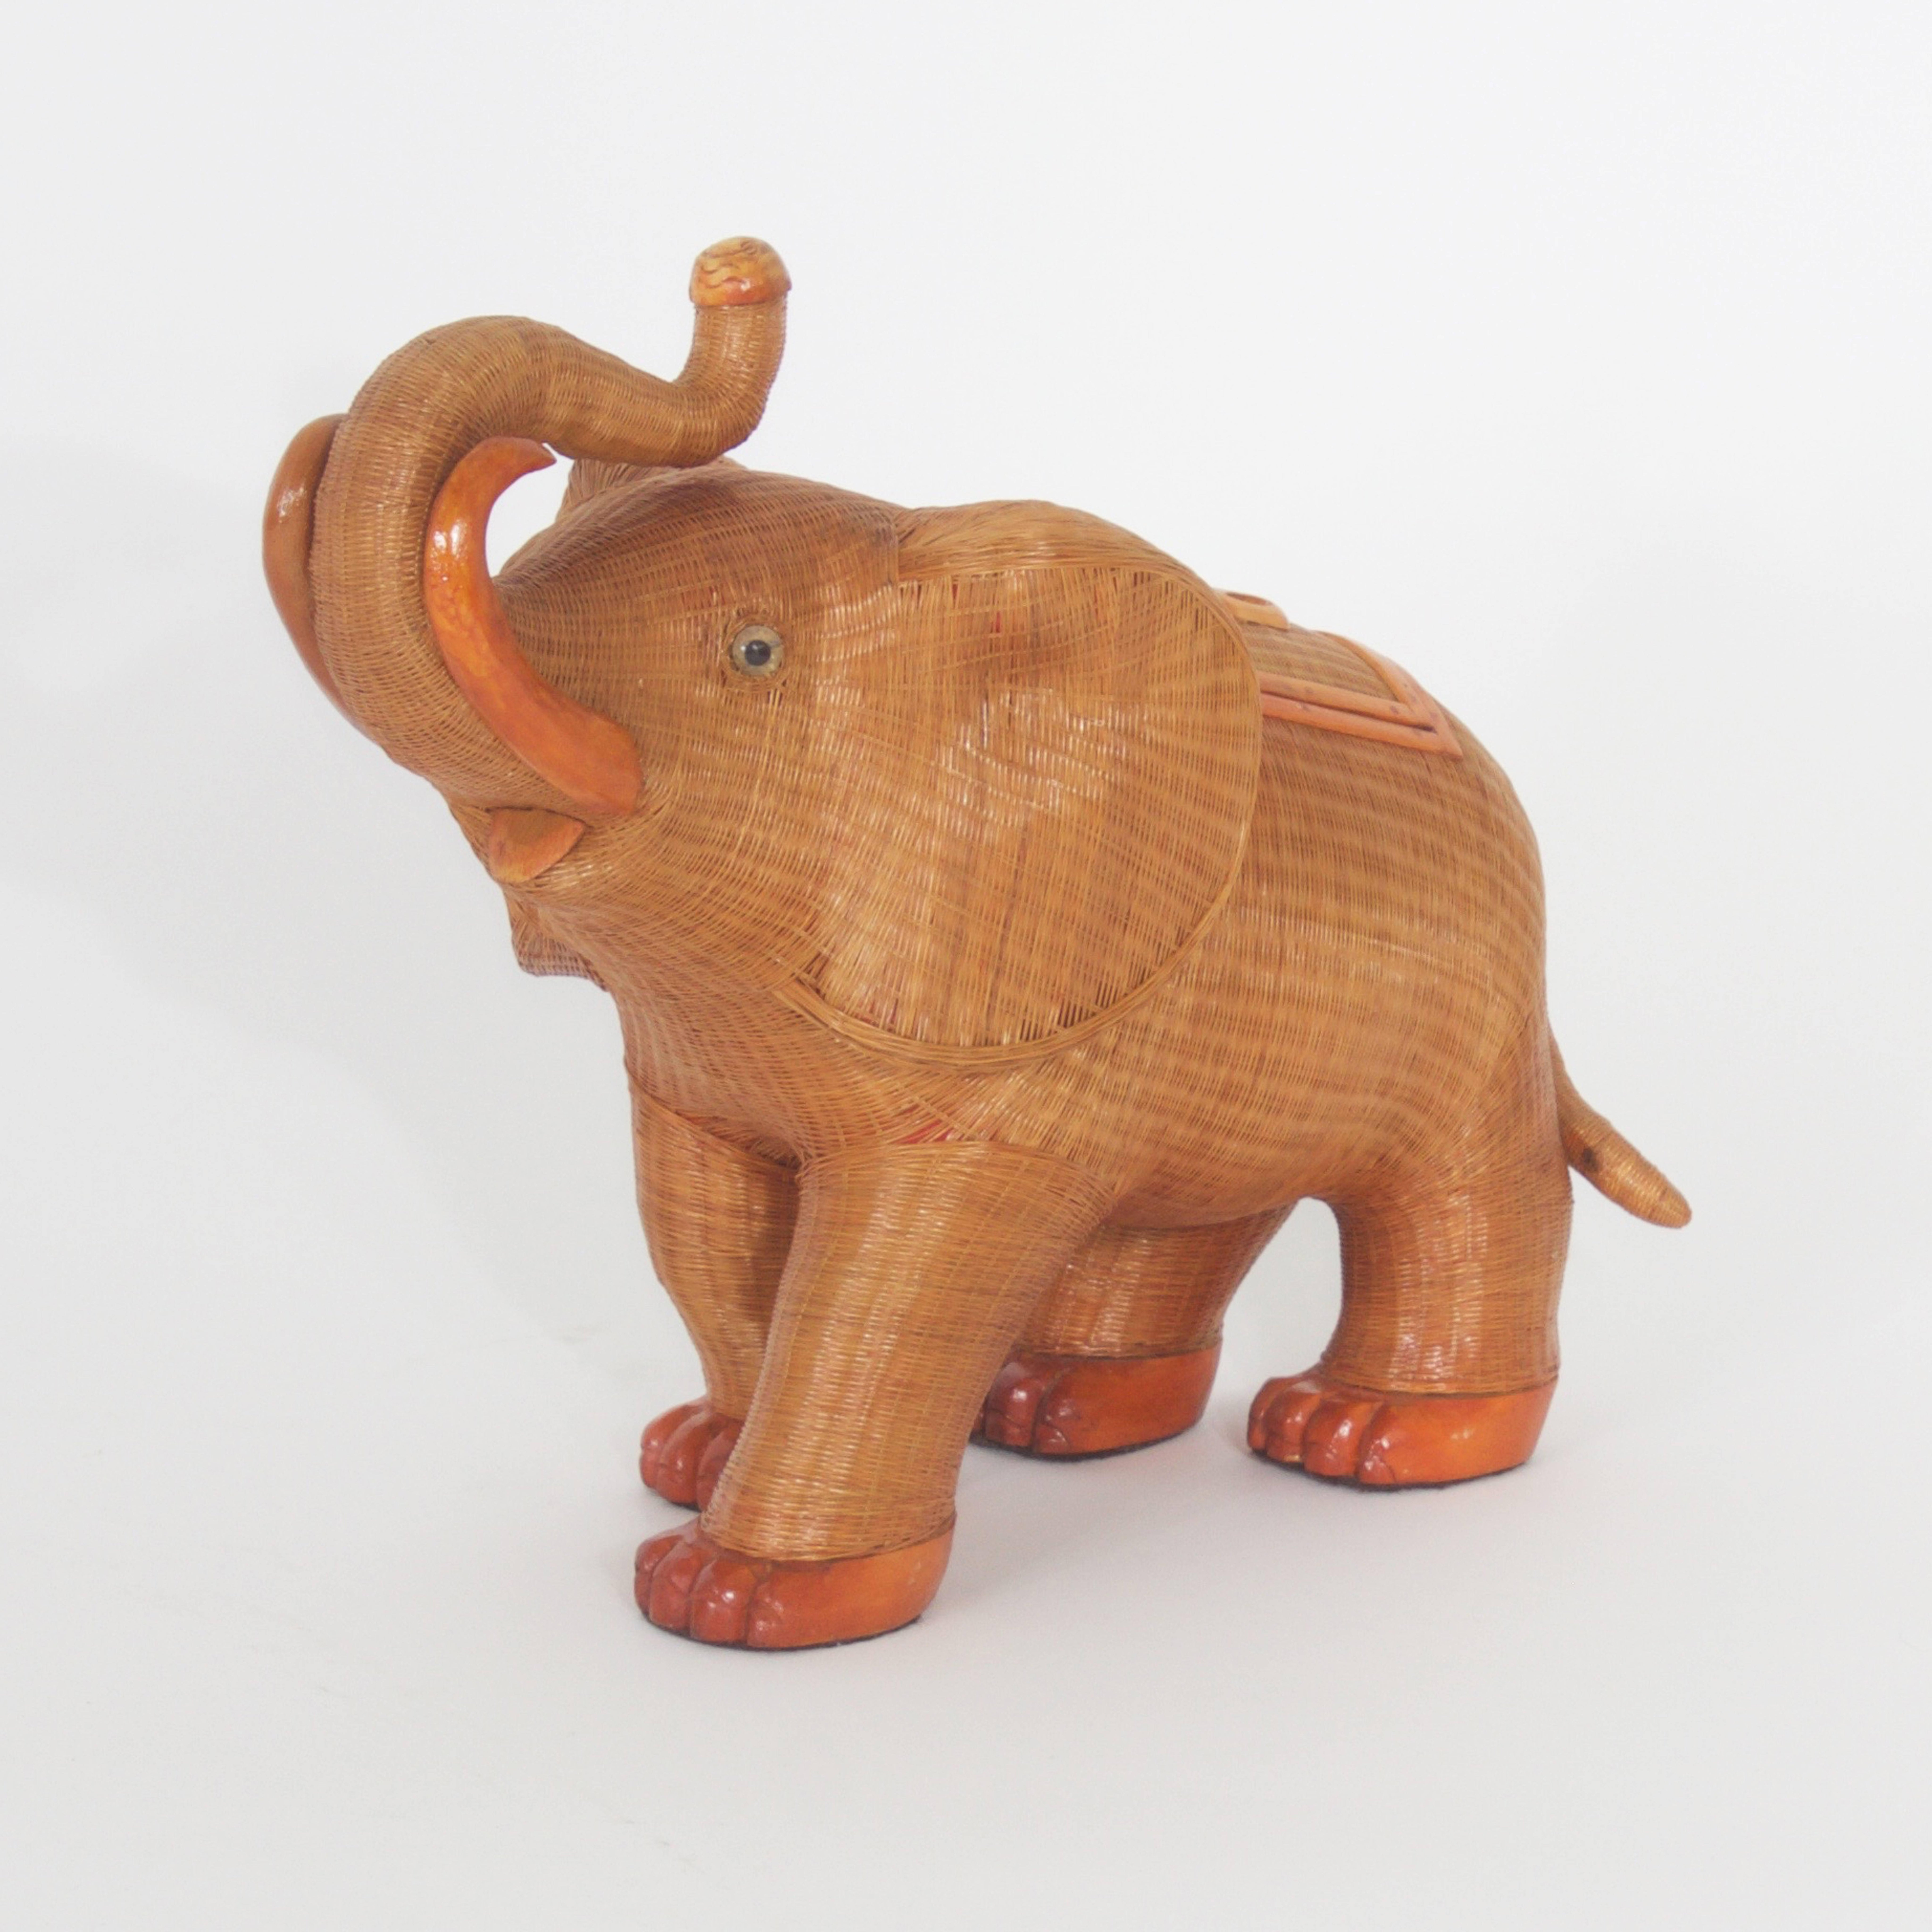 Large and impressive mid century wicker elephant basket with a raised trunk and tusks for good luck. Constructed of wicker or reed in a micro weave. Having a removable lid that opens to reveal storage for a secret stash.